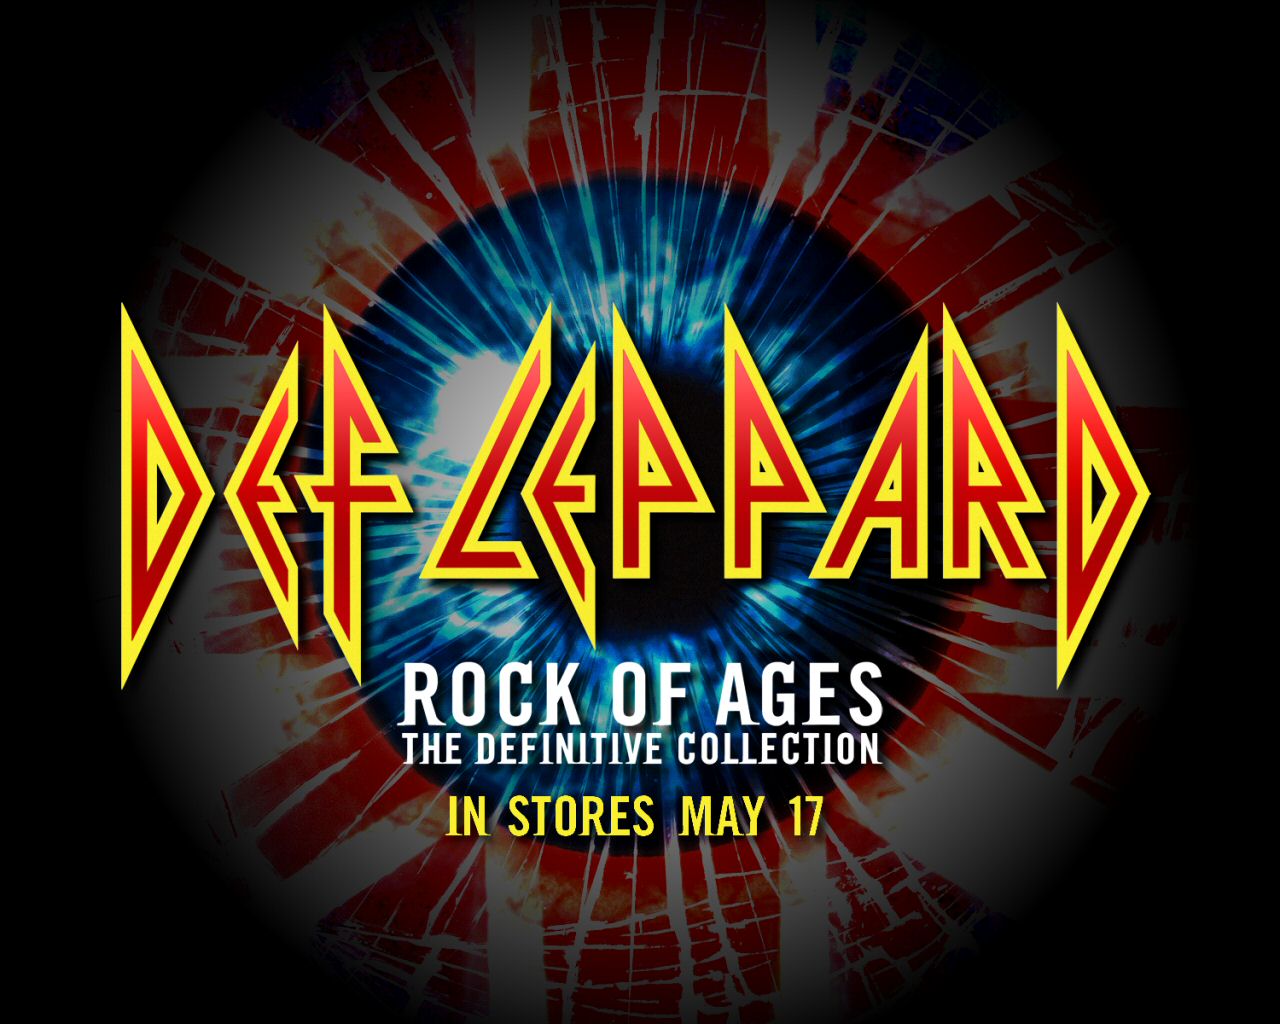 def leppard rock of ages photograph